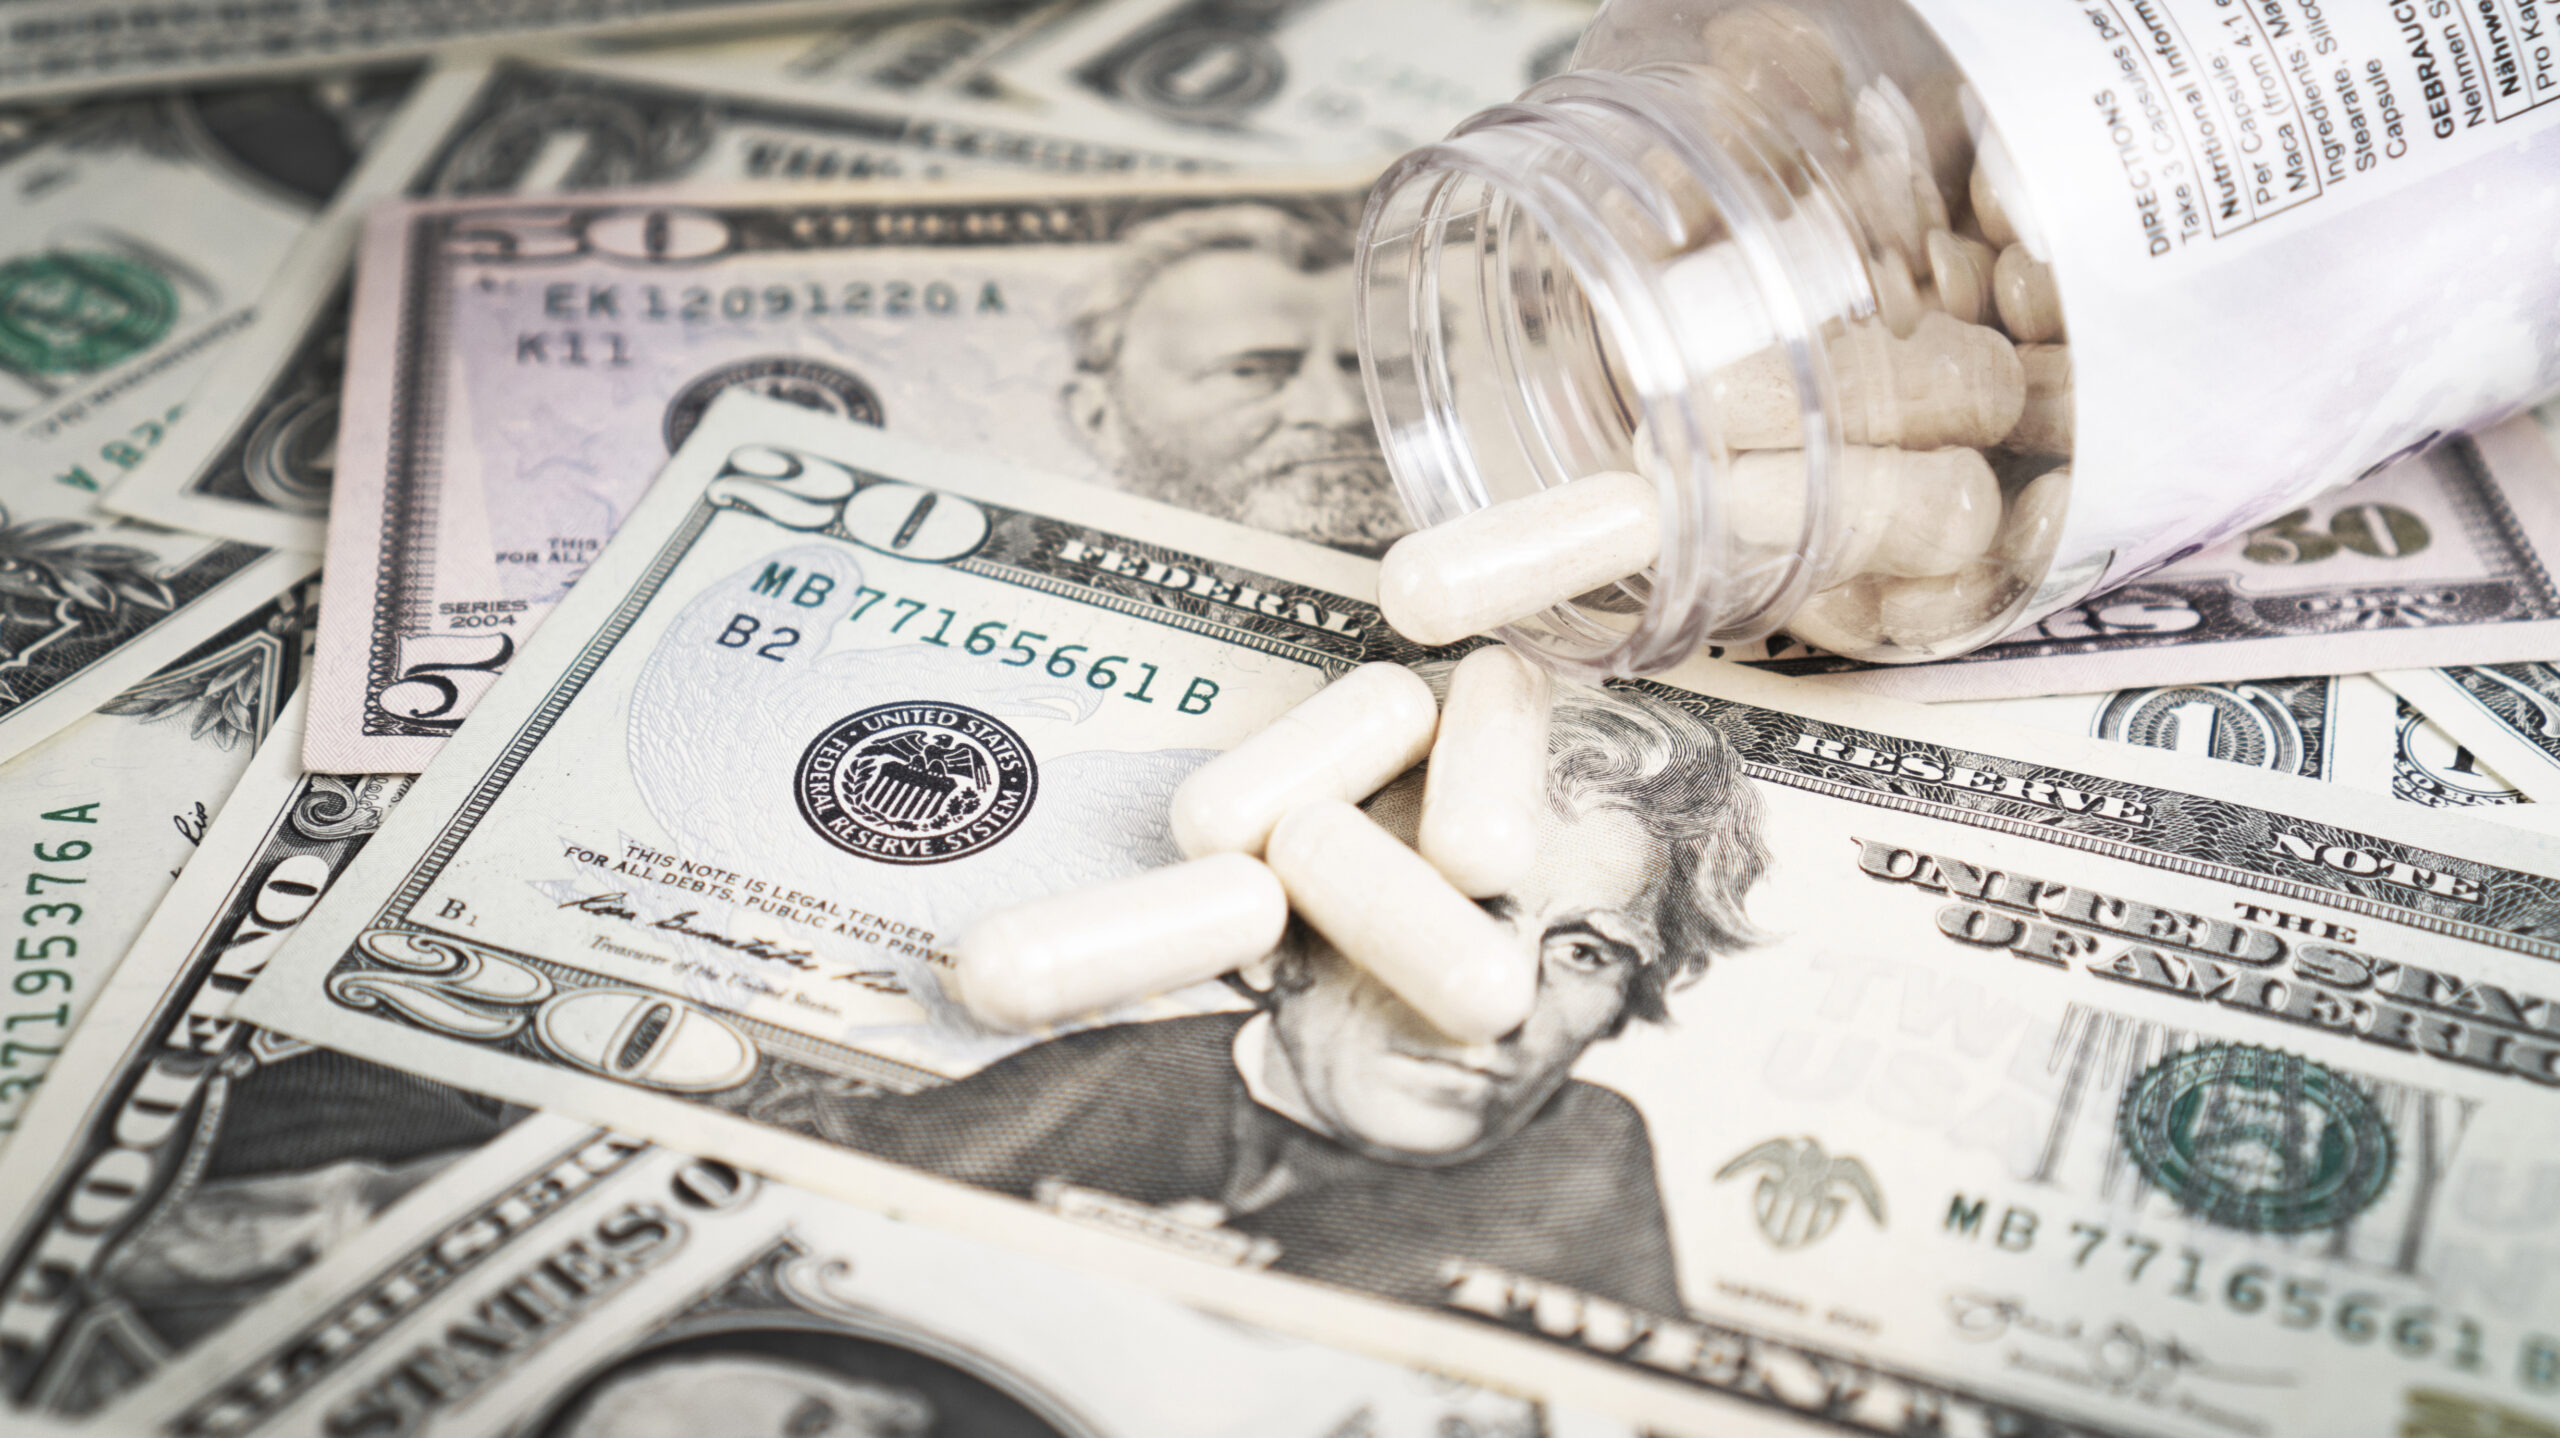 Money shouldn't be a barrier to healthcare